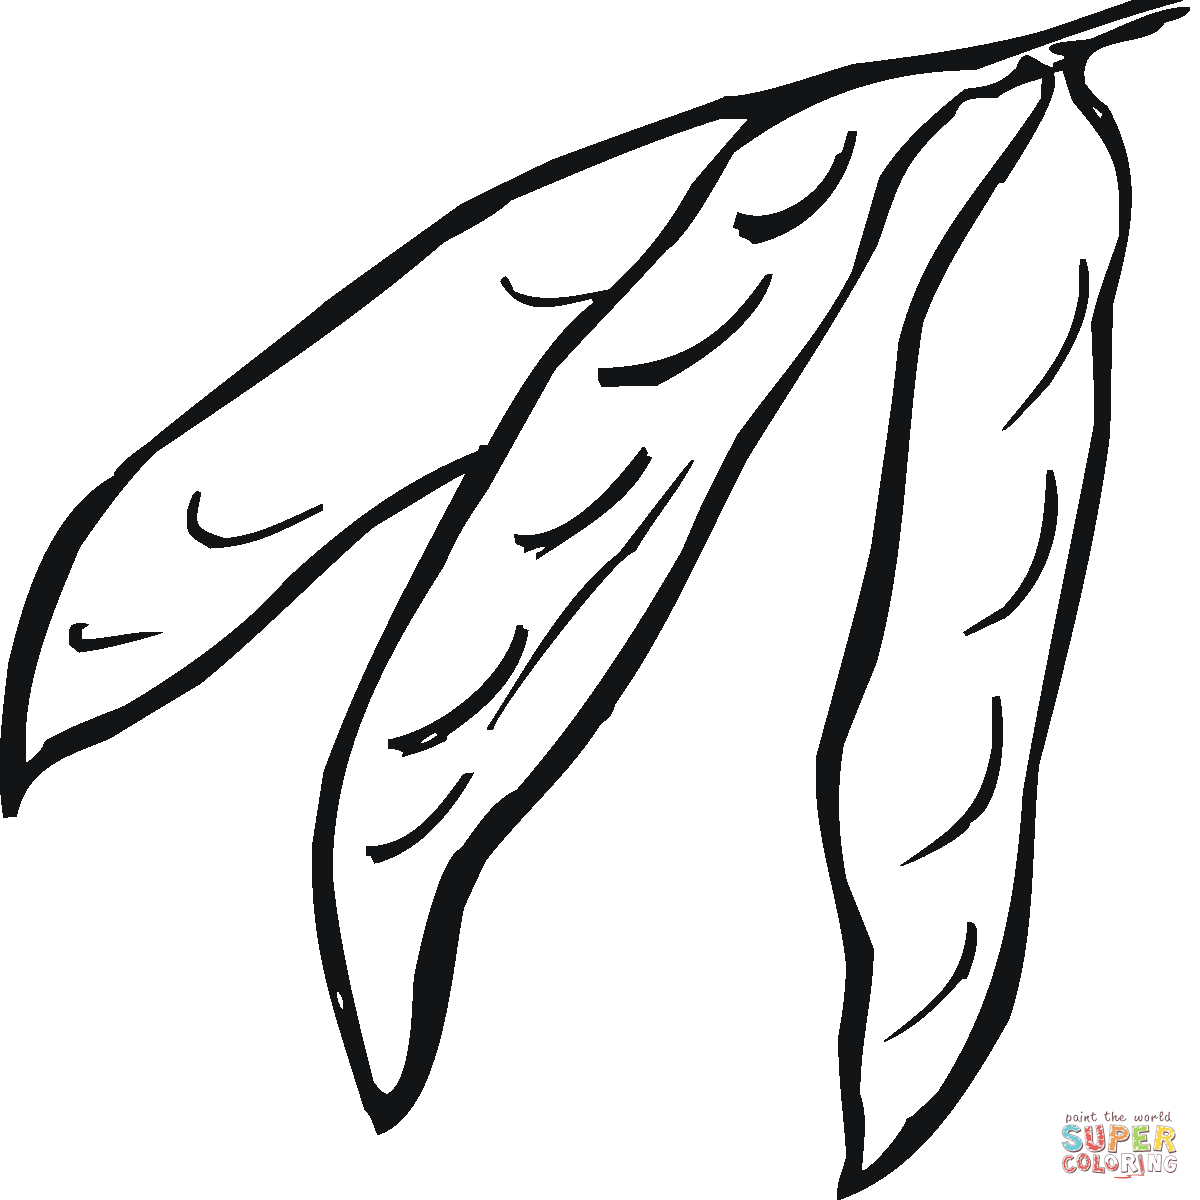 Peas 12 coloring page | Free Printable Coloring Pages